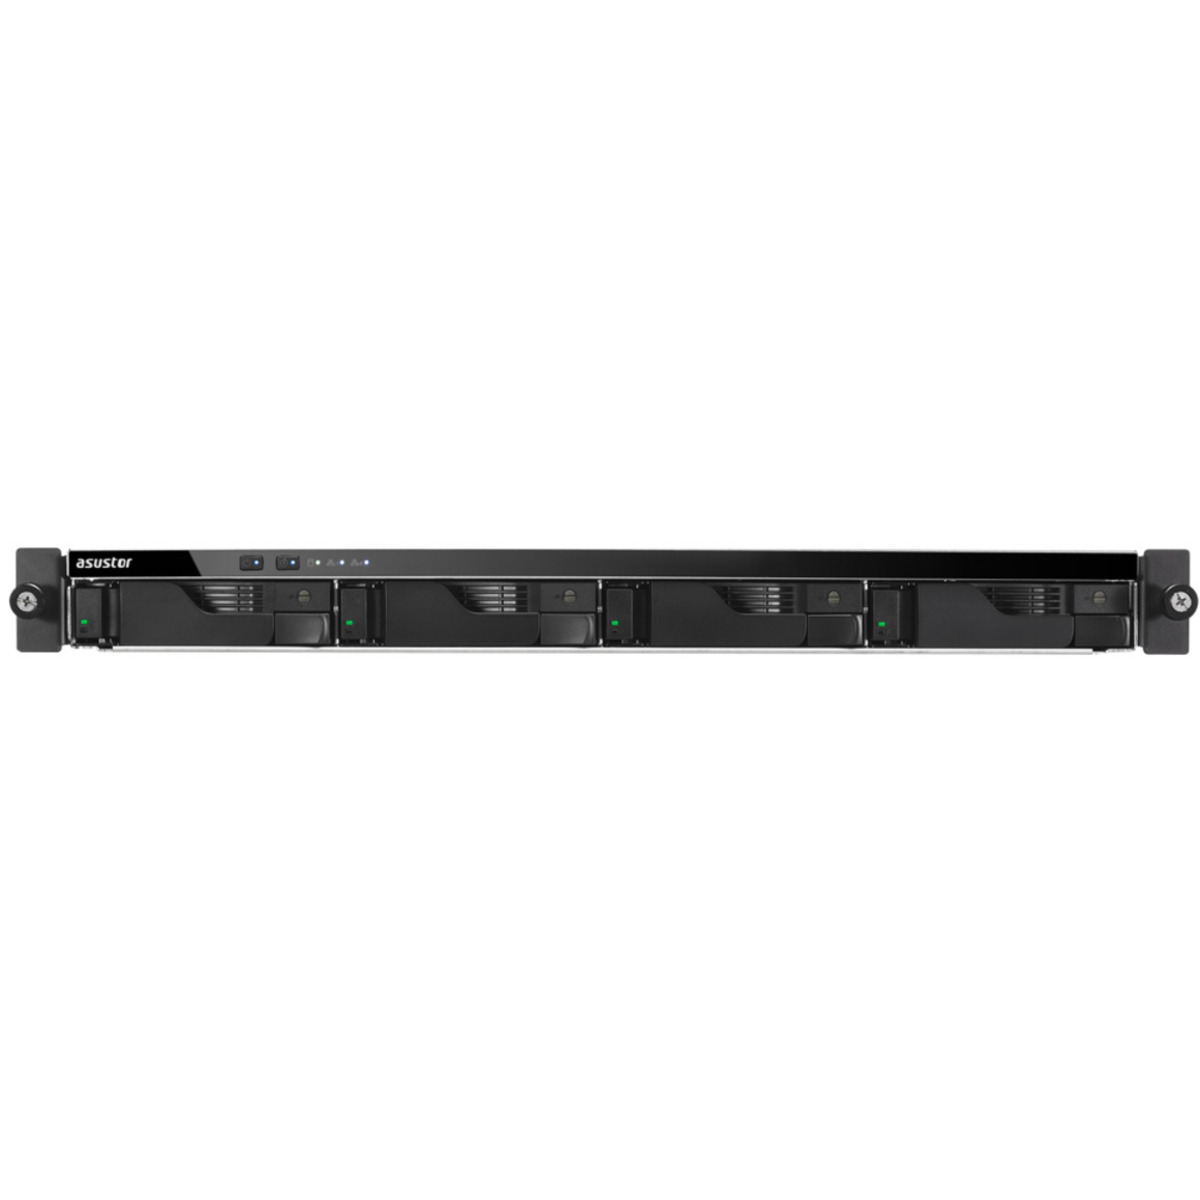 ASUSTOR LOCKERSTOR 4RD AS6504RD 18tb 4-Bay RackMount Multimedia / Power User / Business NAS - Network Attached Storage Device 3x6tb Western Digital Gold WD6003FRYZ 3.5 7200rpm SATA 6Gb/s HDD ENTERPRISE Class Drives Installed - Burn-In Tested - FREE RAM UPGRADE LOCKERSTOR 4RD AS6504RD